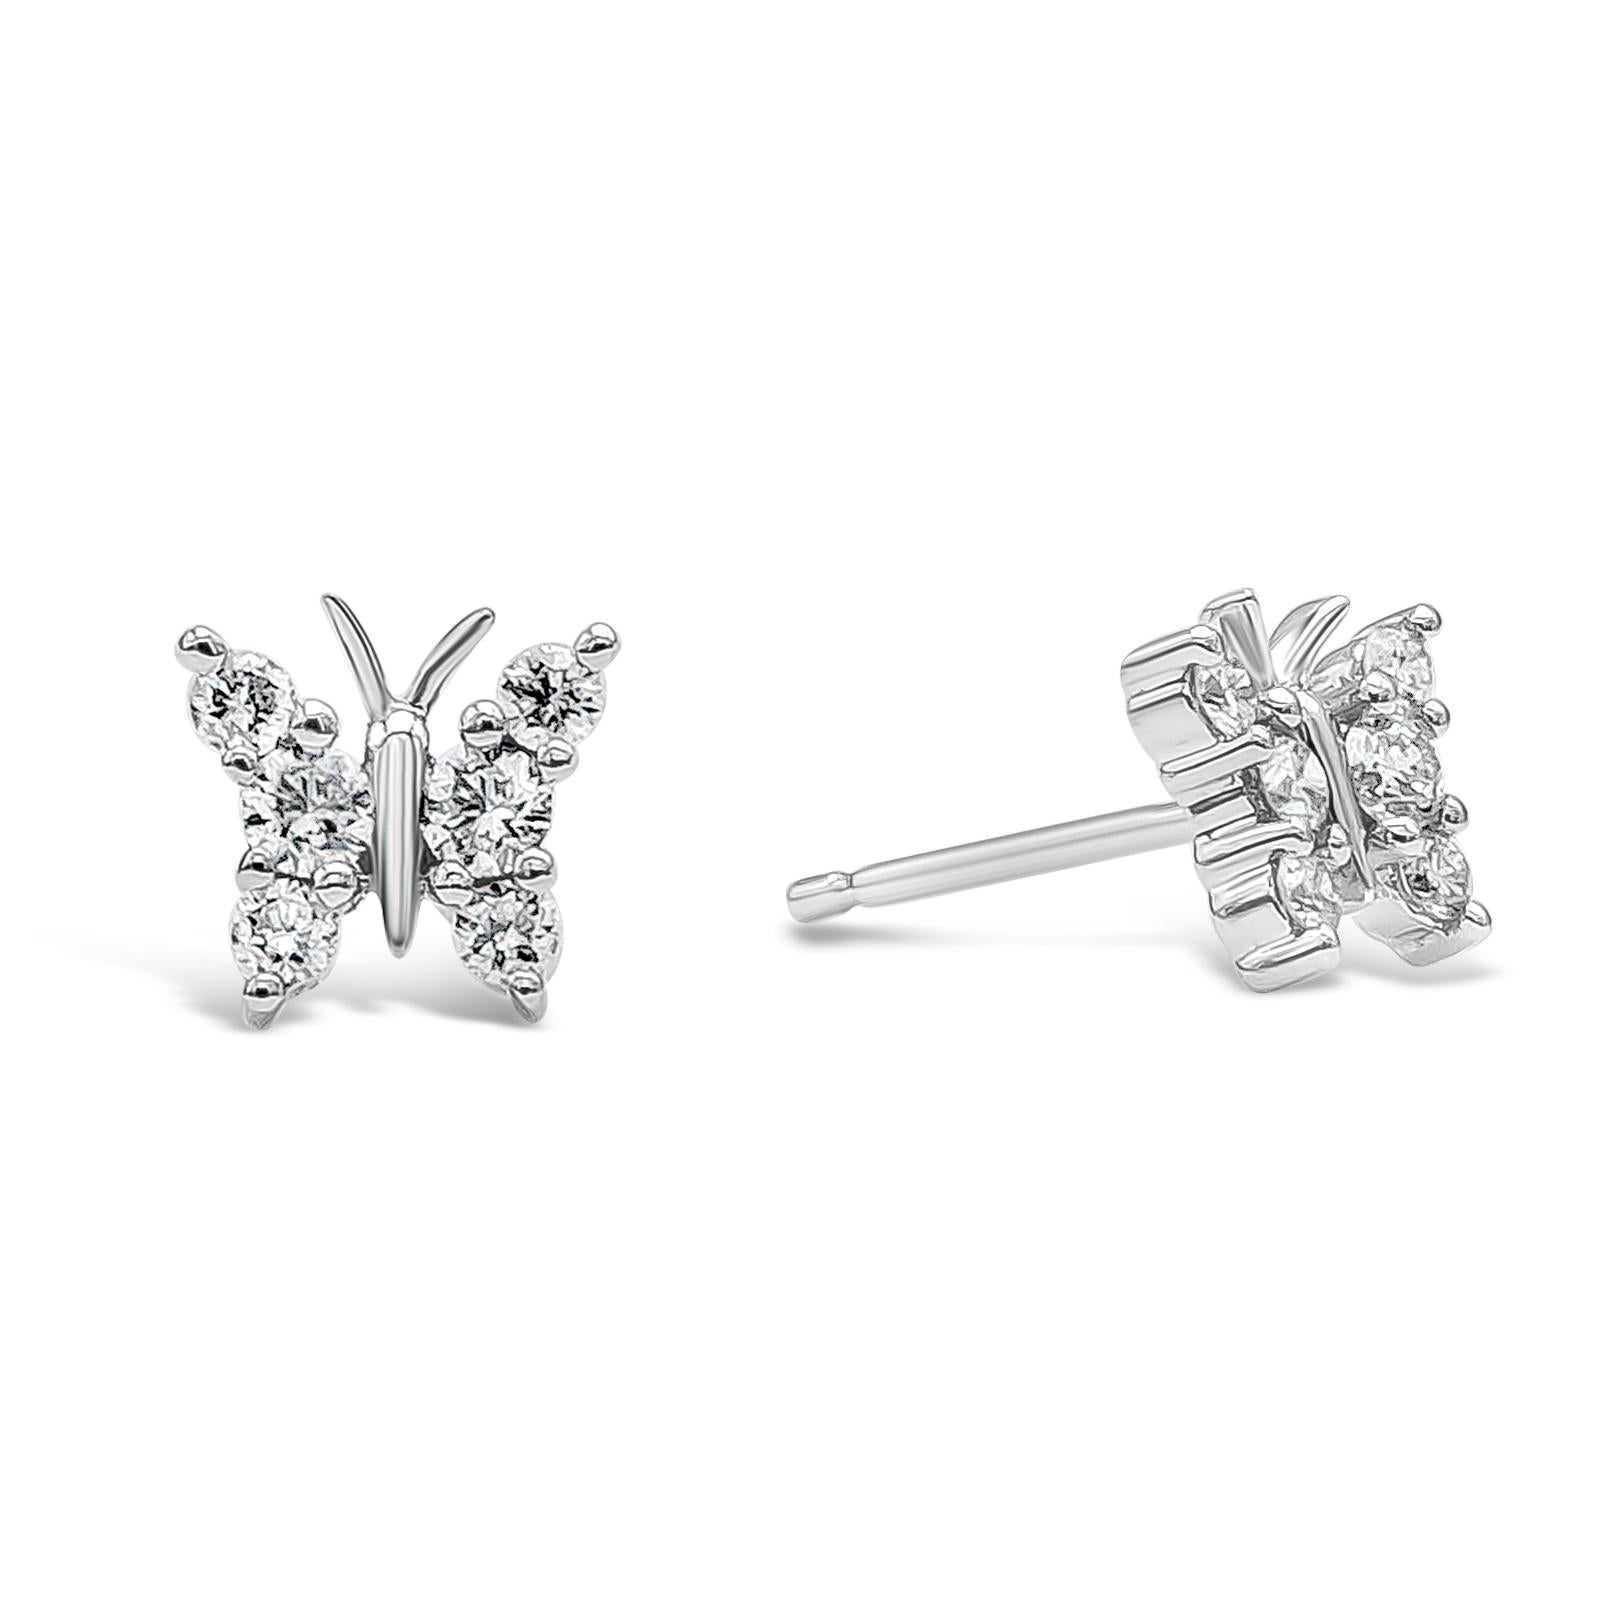 A simple and stylish pair of earrings, featuring 12 pieces of round brilliant cut diamonds weighing 0.30 carat total with F color and VS-SI clarity. Beautifully set on a butterfly motif design made of 18K white gold.

Roman Malakov is a custom